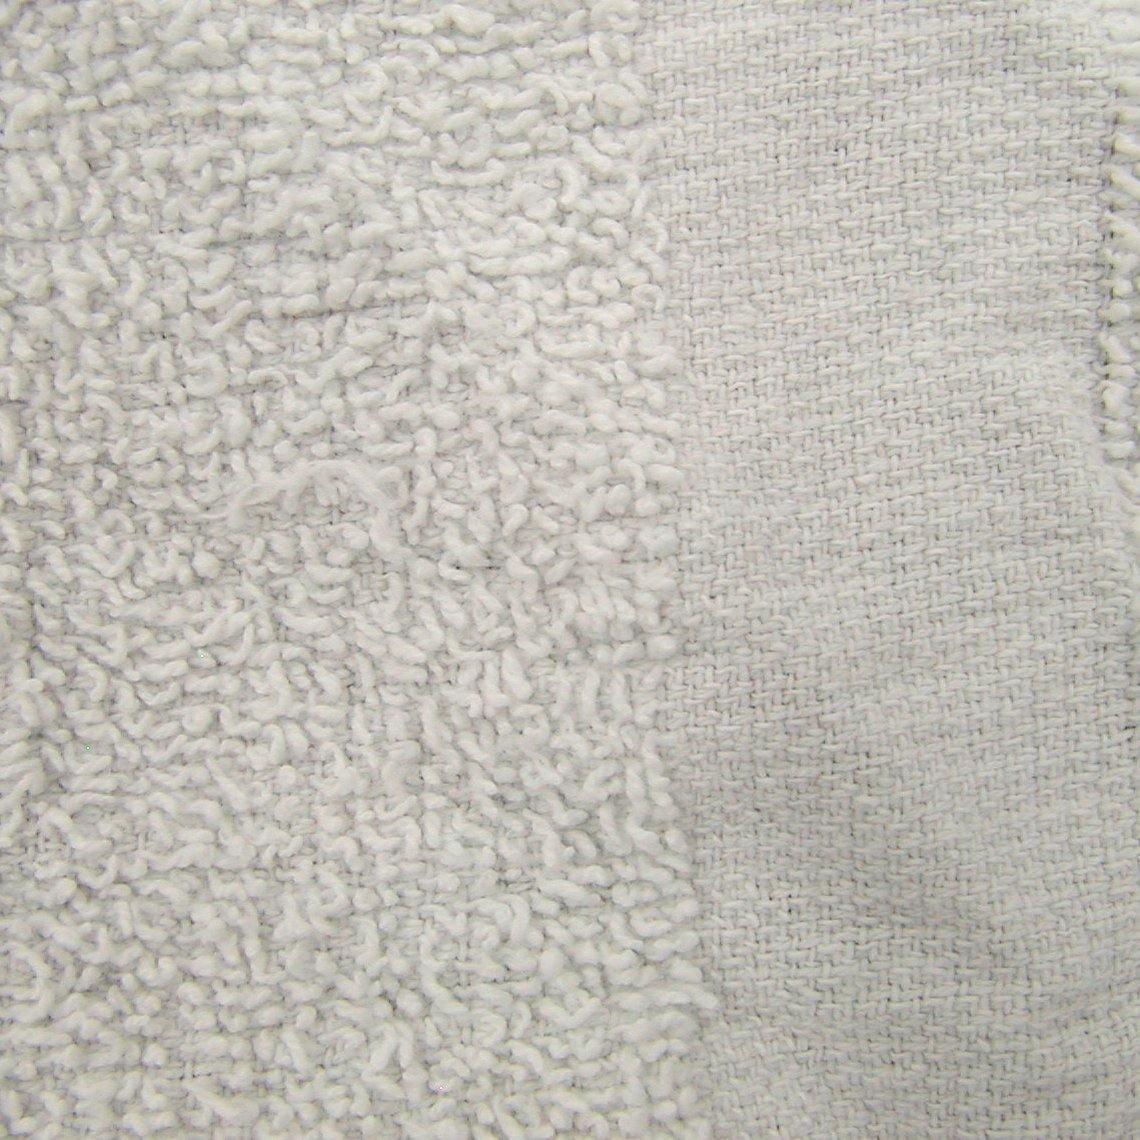 Recycled White Terry Towels - A&A Wiping Cloth